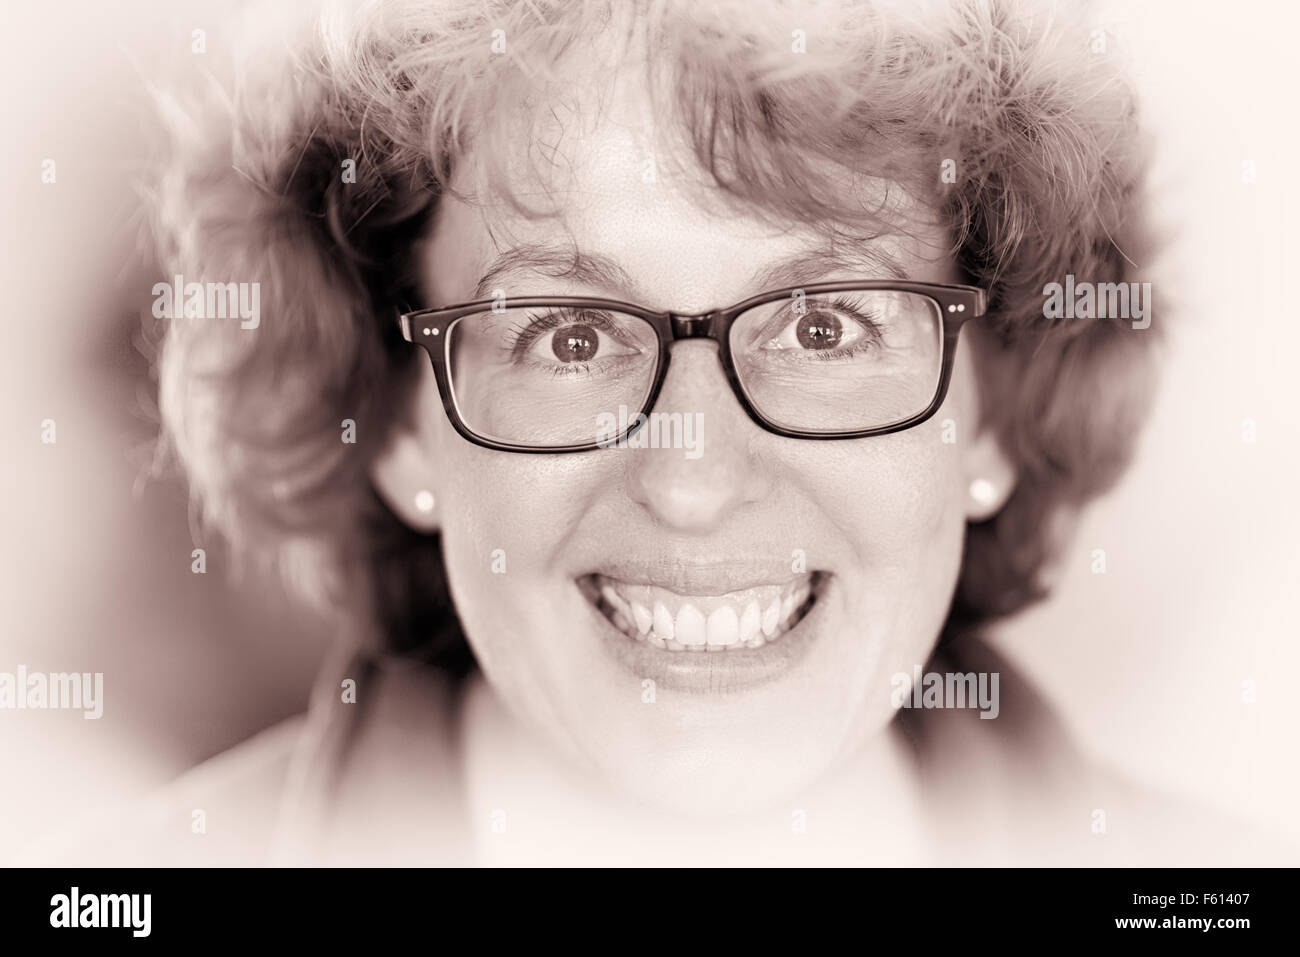 Closeup image of a laughing happy woman with glasses Stock Photo